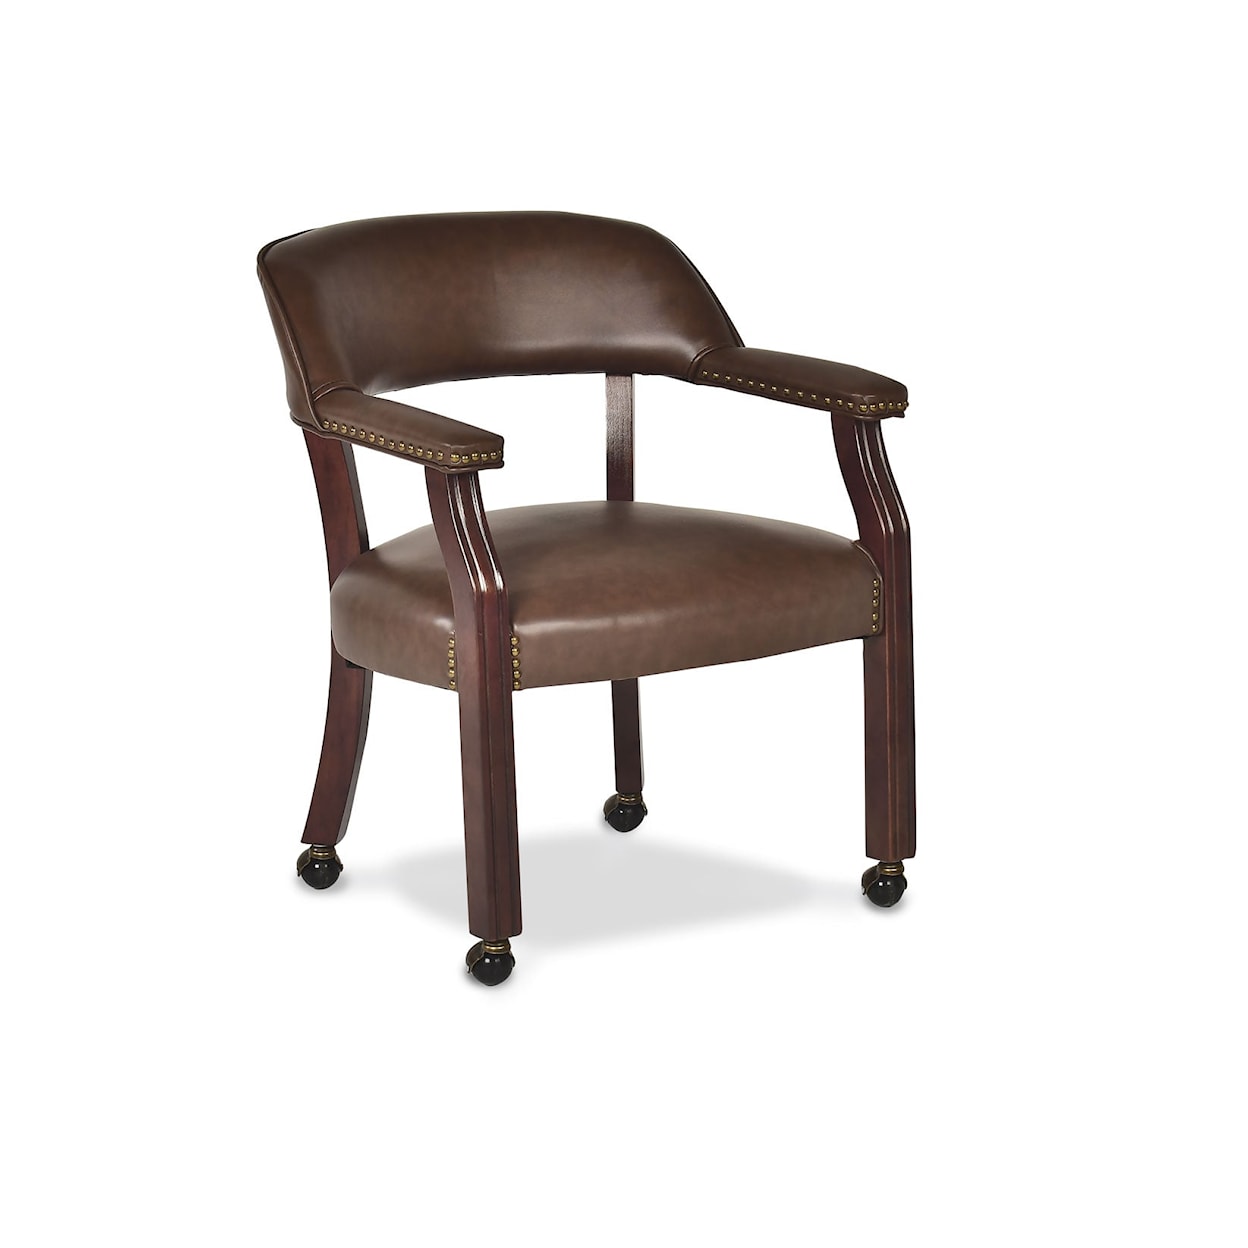 Prime Tournament Tournament Arm Chair with Casters